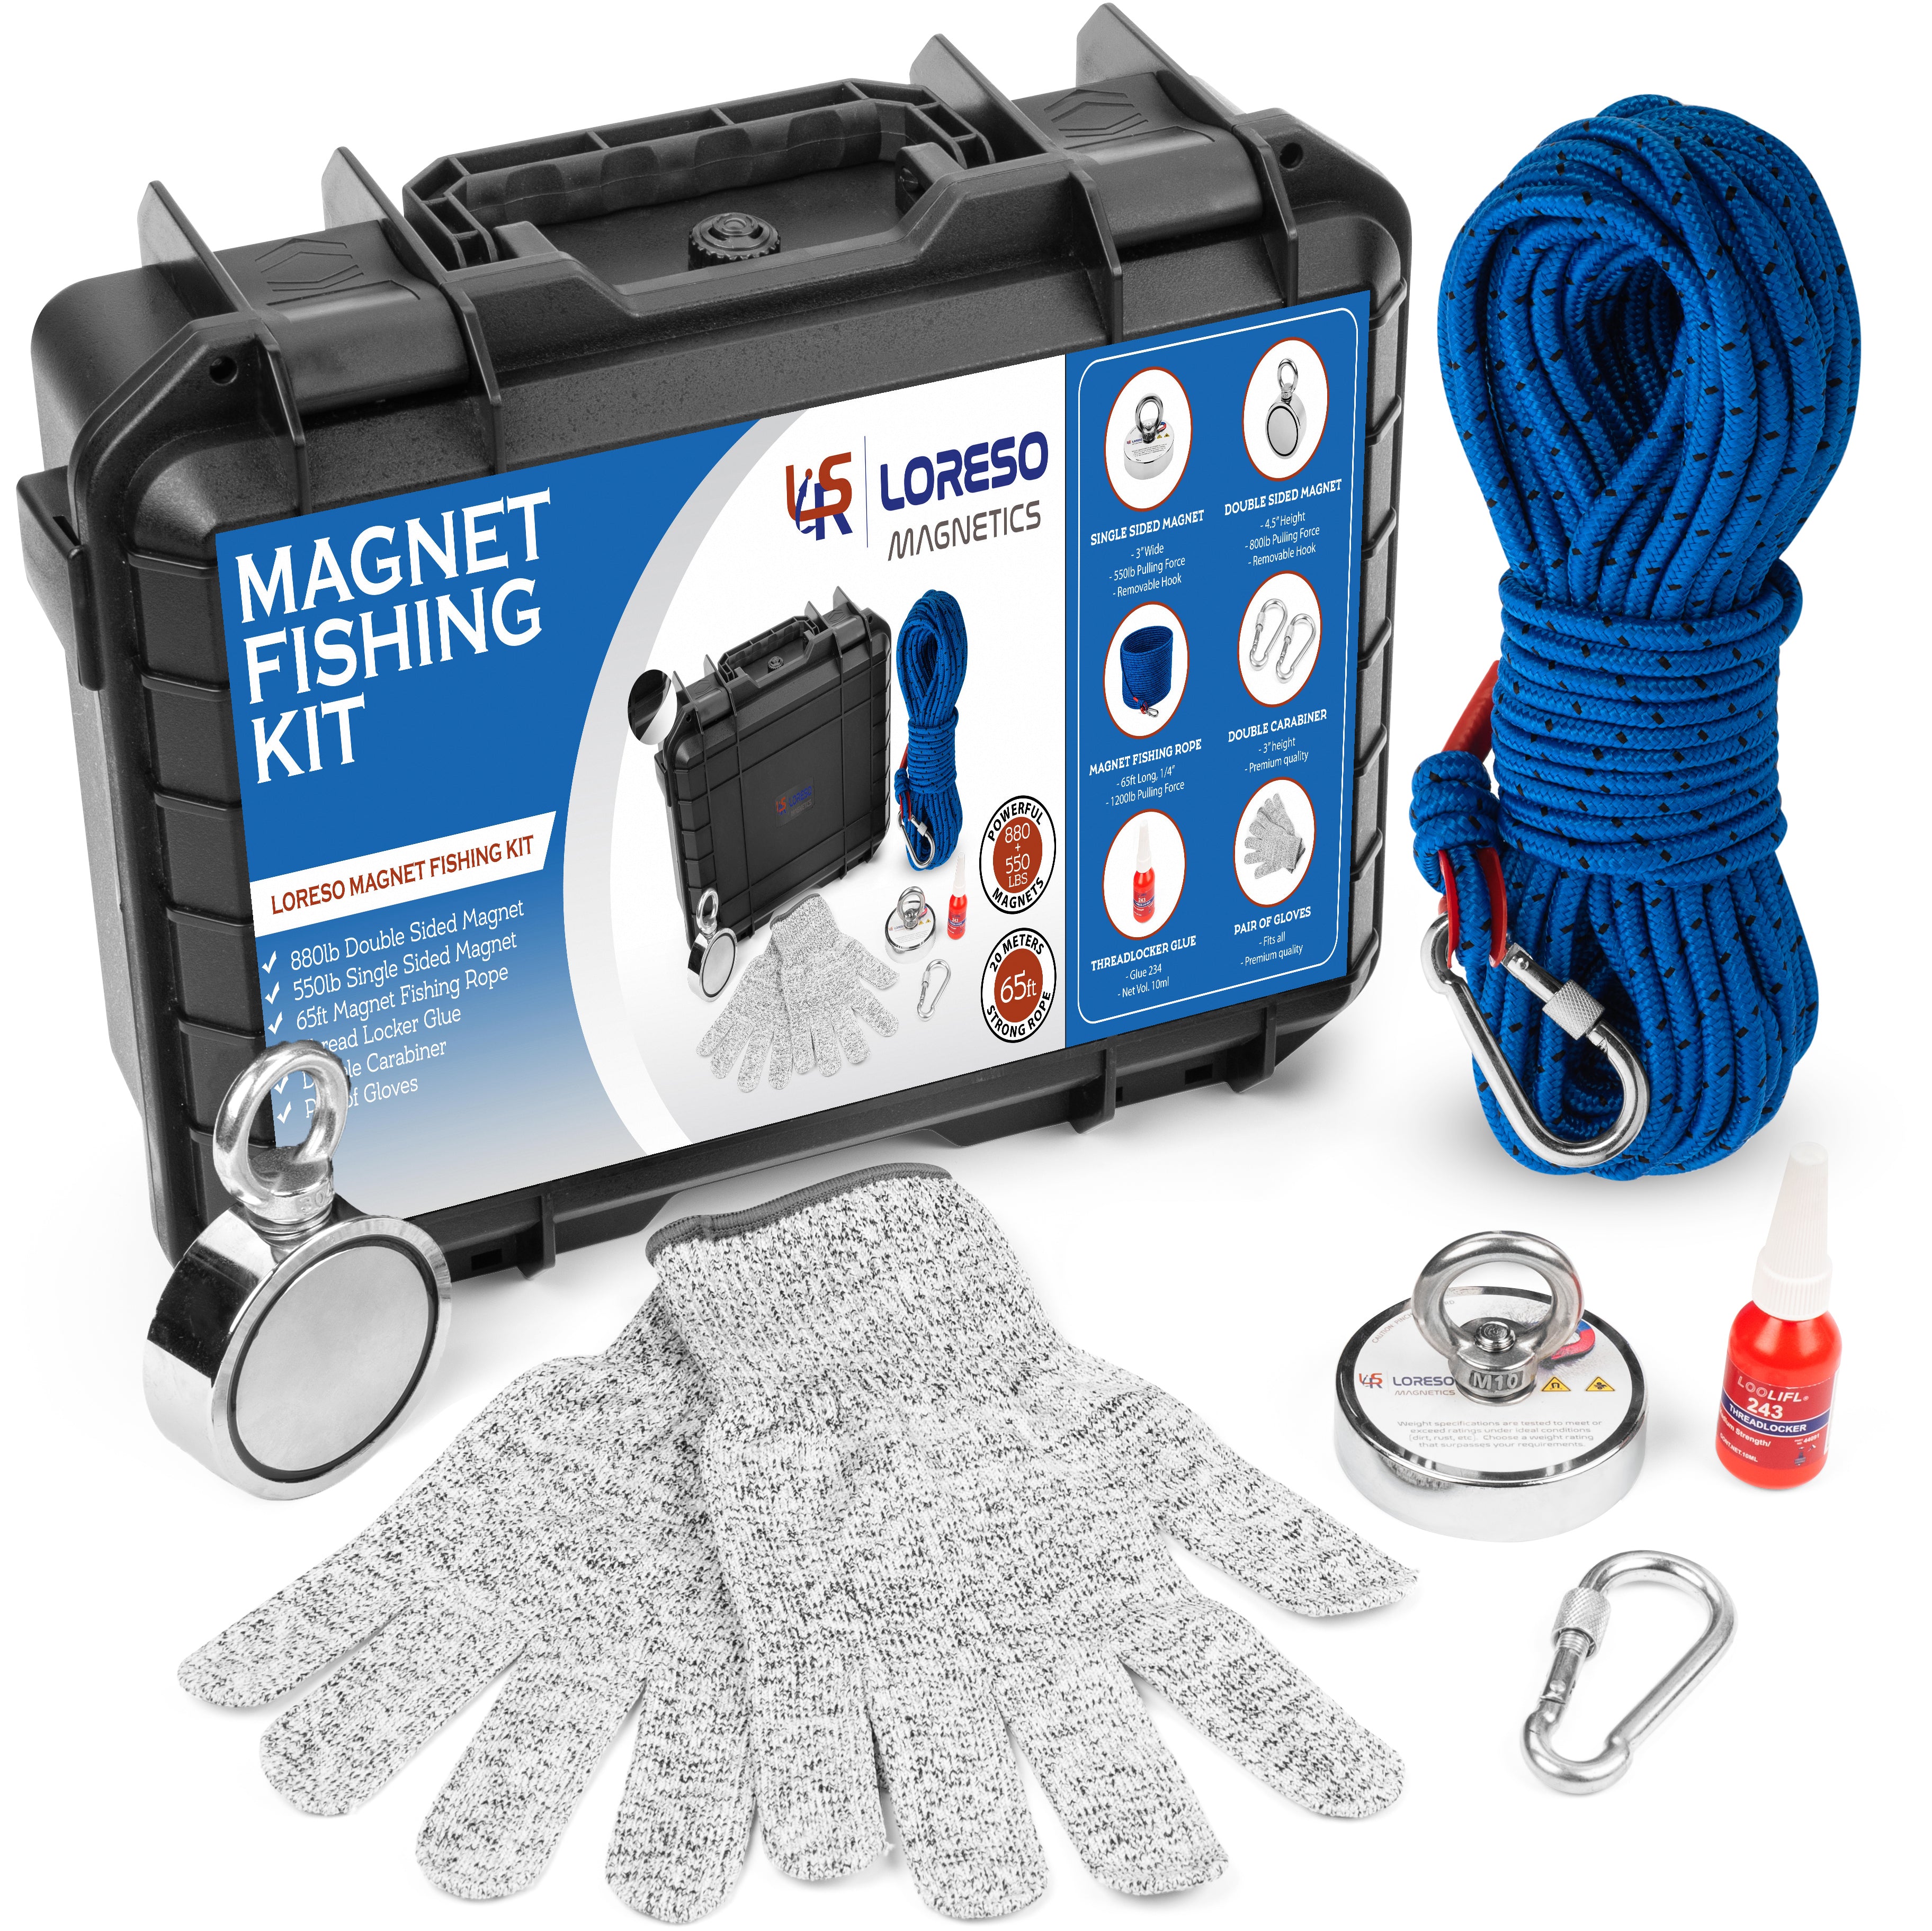 Loreso Magnet Fishing Kit with Case - Complete Magnets Fishing Kit Box with Double Sided Magnet 880lb, Single Sided 550lb, Rope + Carabiner